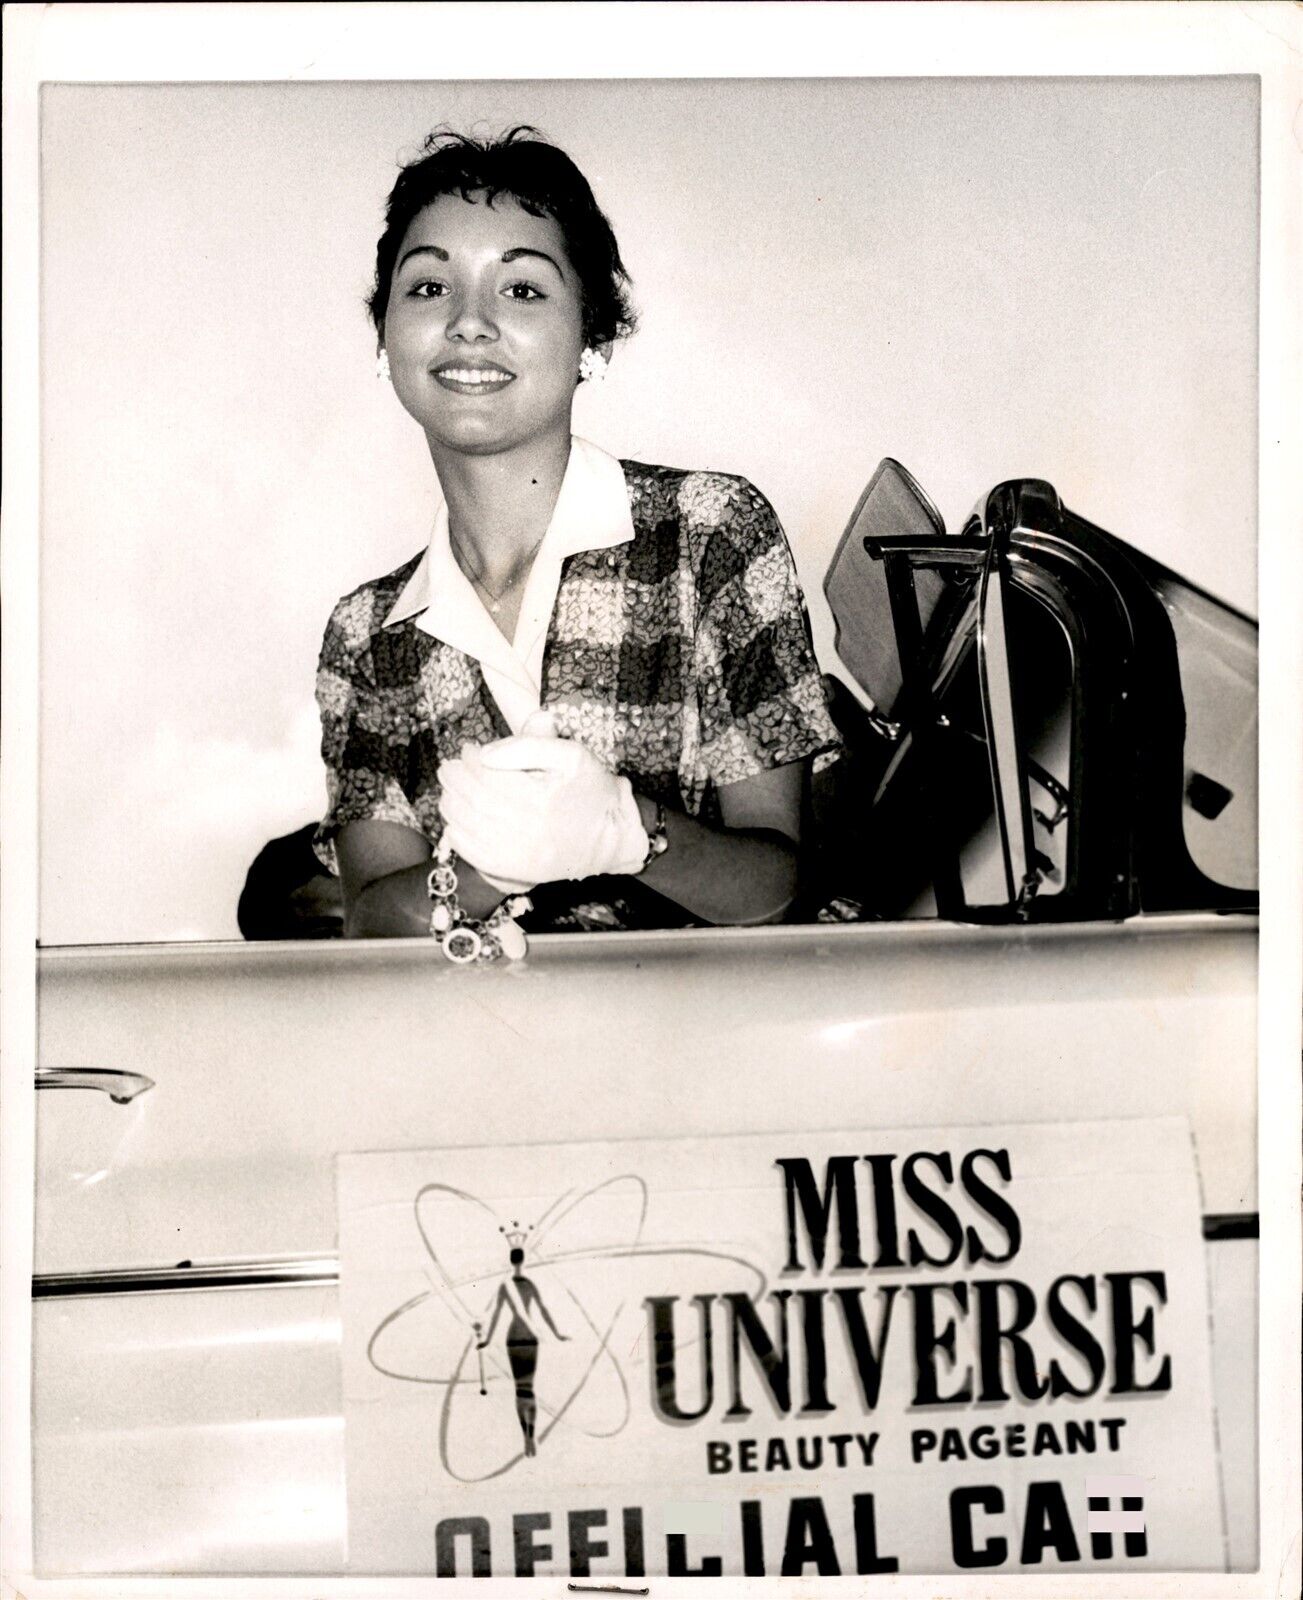 LD263 1960 Original Photo CORINNE HUFF MISS UNIVERSE BEAUTY PAGEANT OFFICIAL CAR